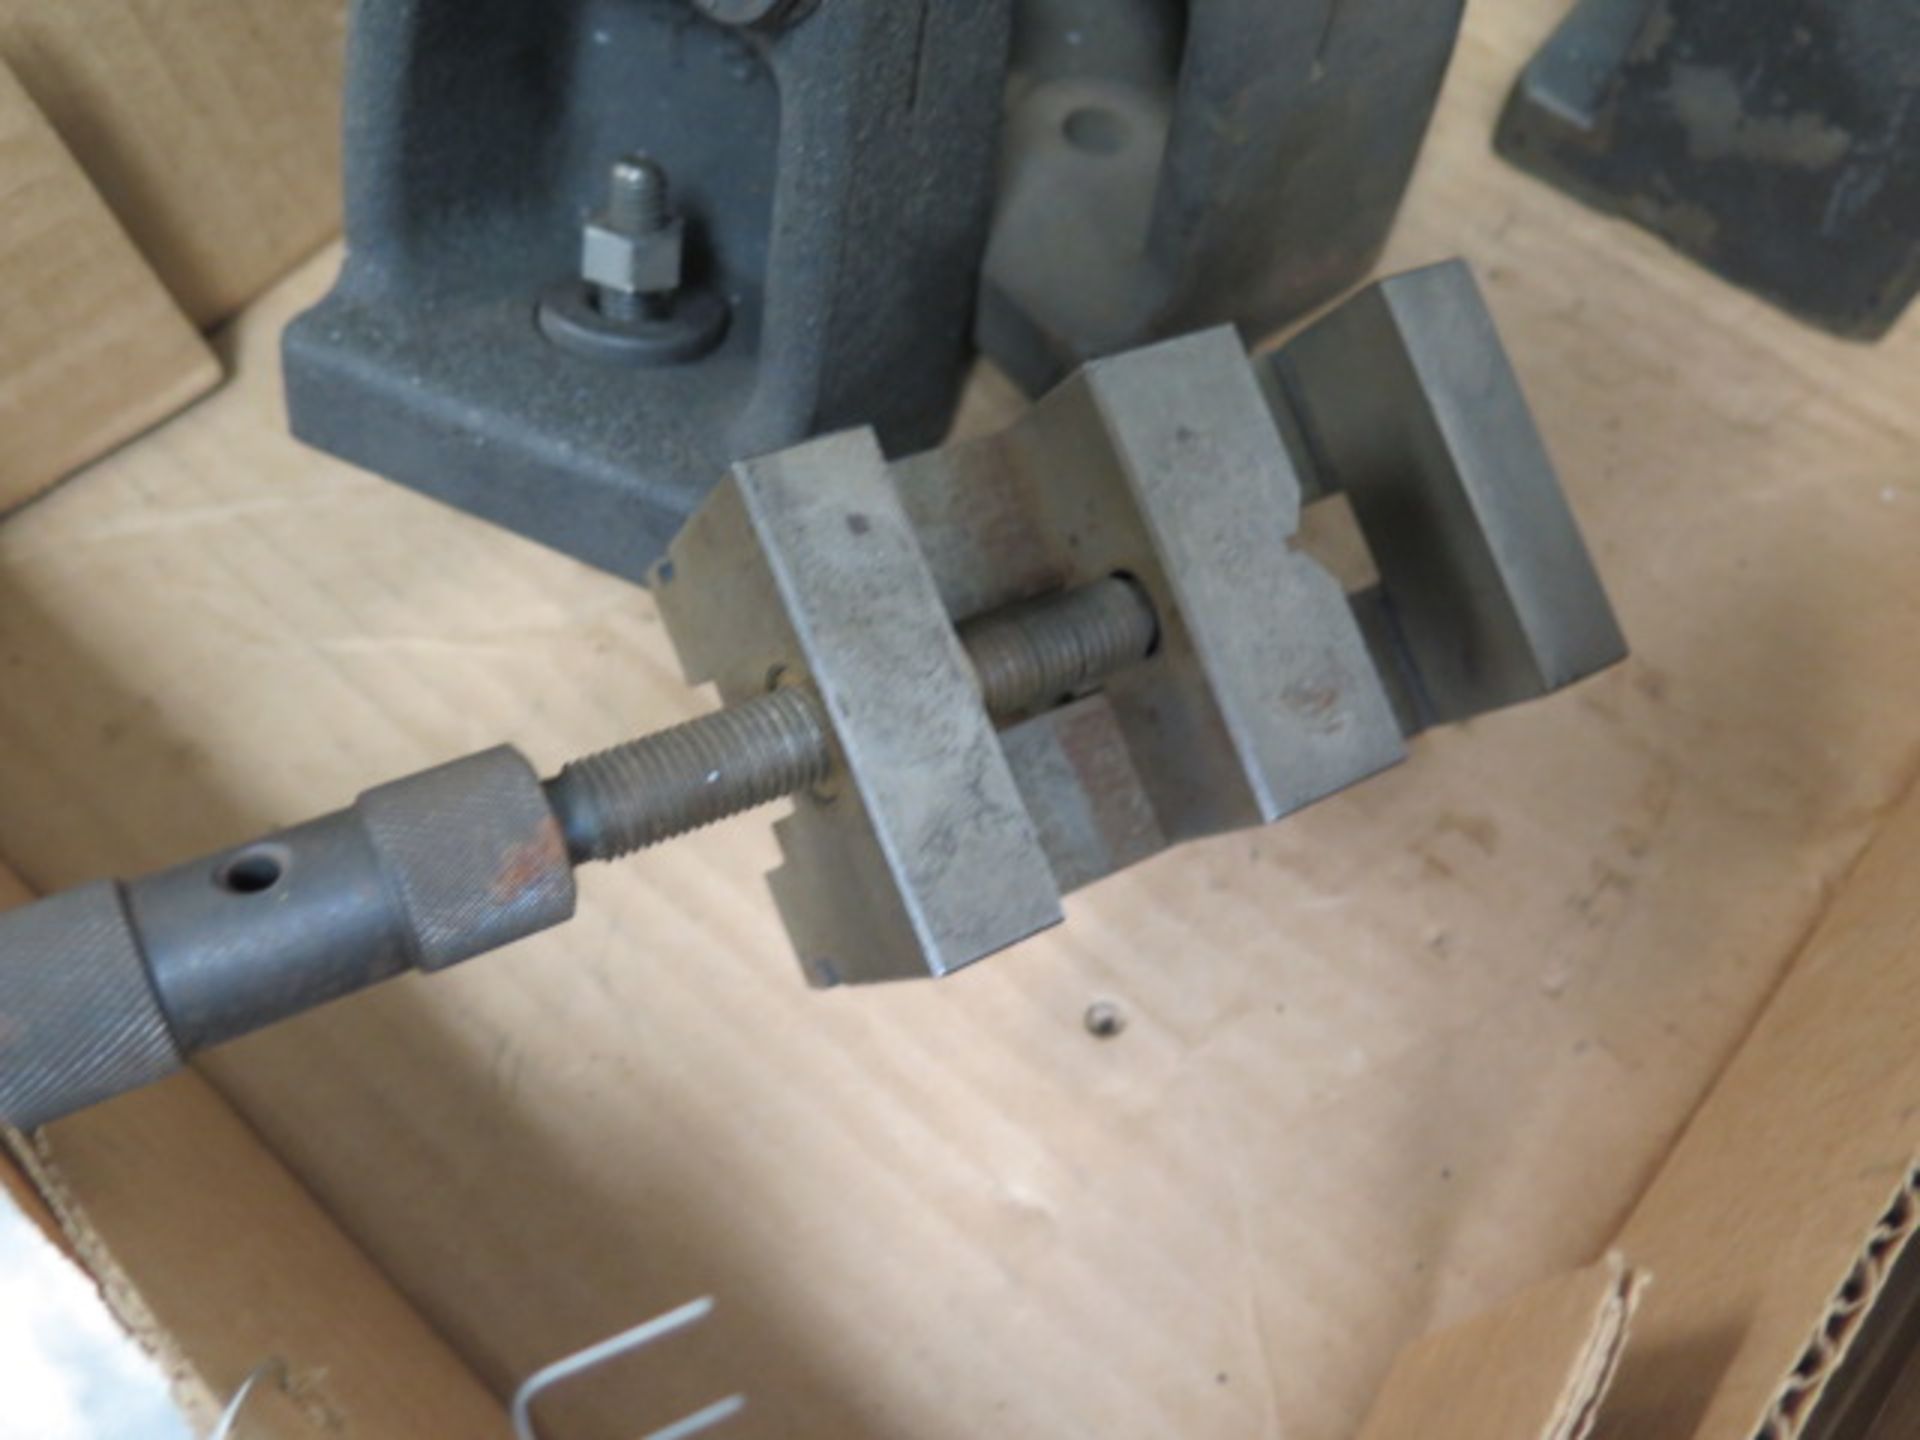 Mill Centers (4) and 2 3/8" Machine Vise (SOLD AS-IS - NO WARRANTY) - Image 3 of 4